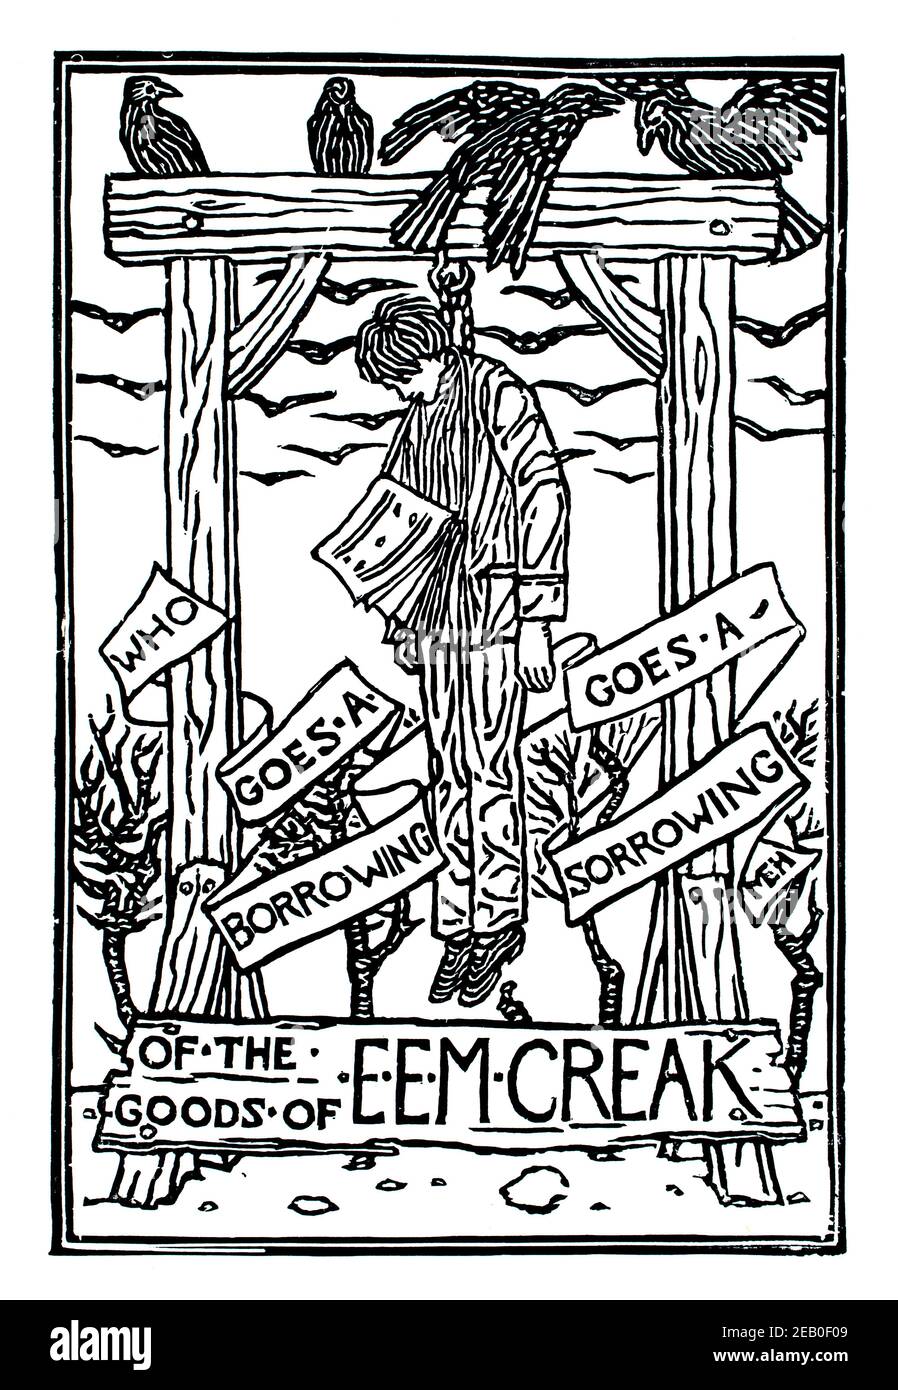 The Goods of E E M Creek, wood block printed design by female artist Margaret Harrison in 1898 The Studio an Illustrated Magazine of Fine and Applied Stock Photo